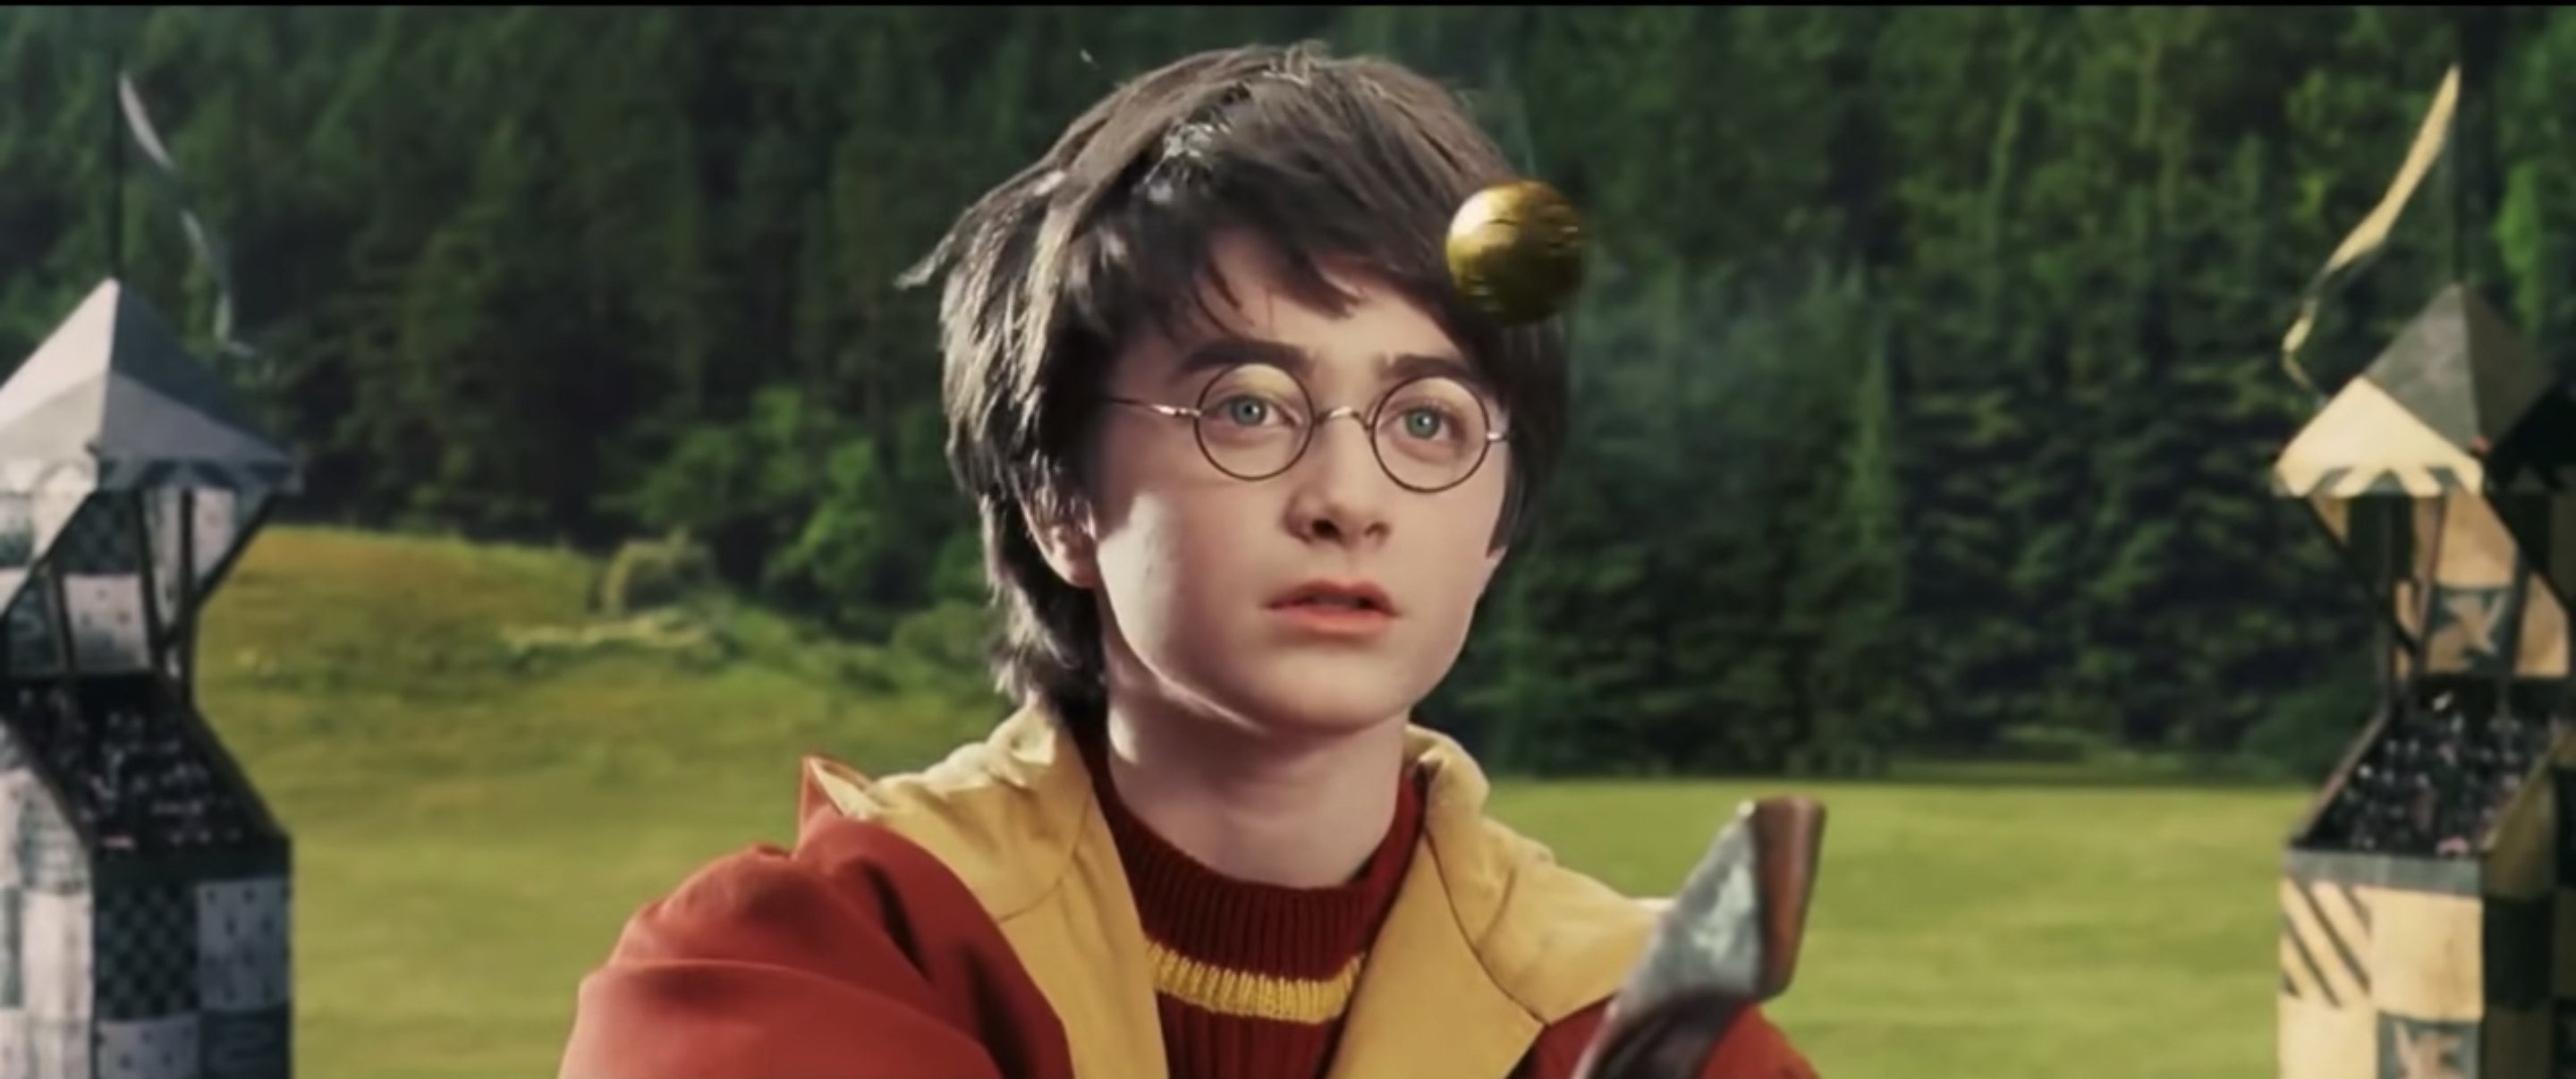 Harry Potter playing Quidditch